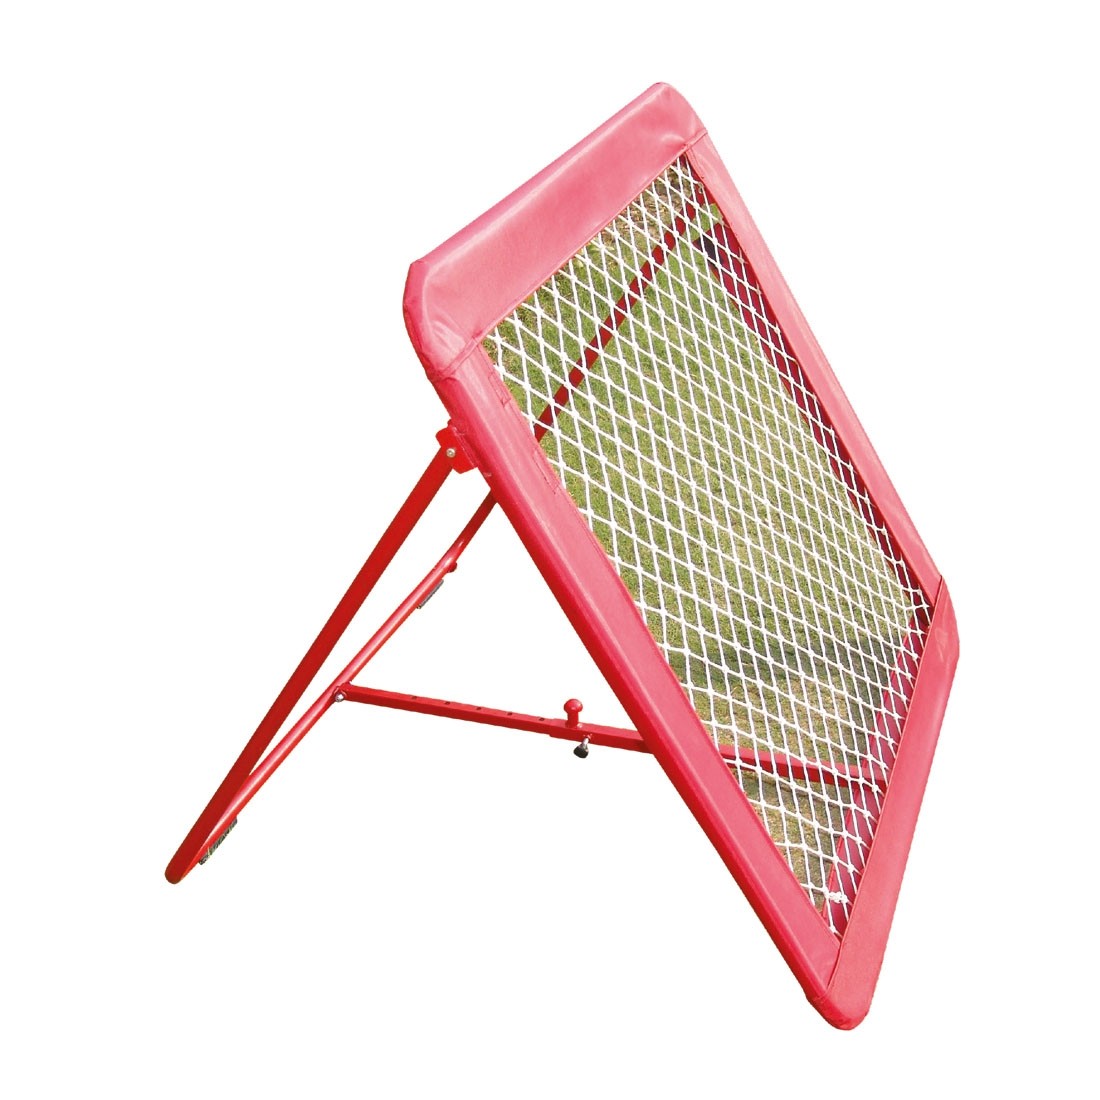 TCHOUKBALL REBOUNDER WITH ADJUSTABLE ANGLES & CONTOUR COVER